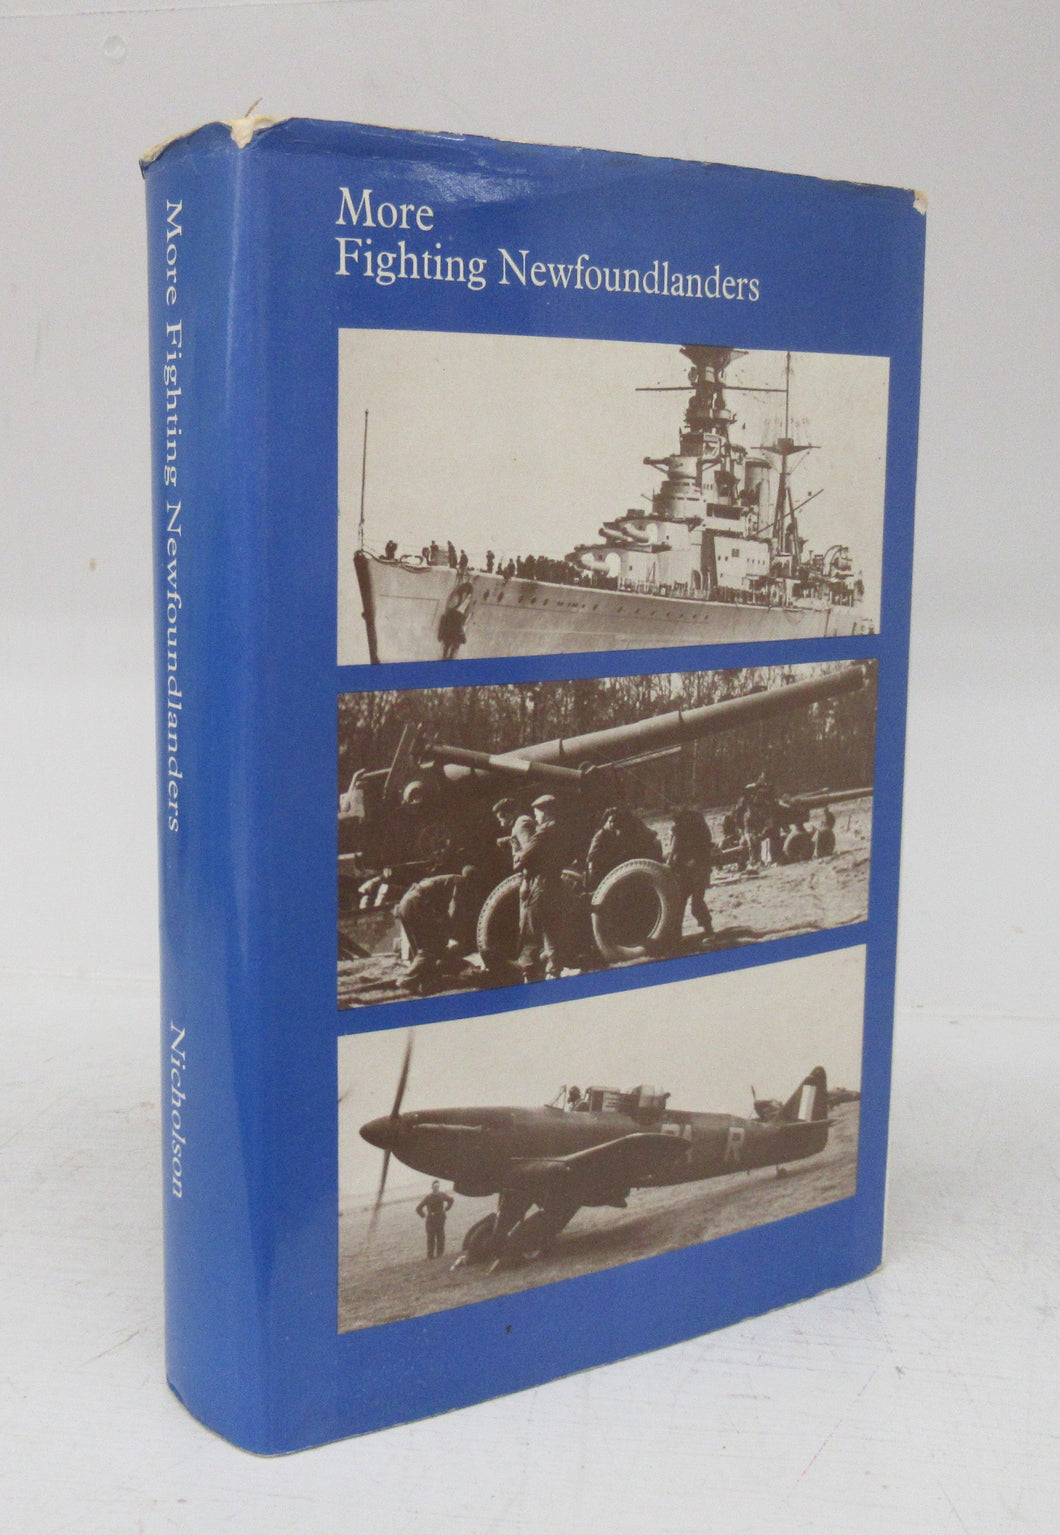 More Fighting Newfoundlanders: A History of Newfoundland's Fighting Forces